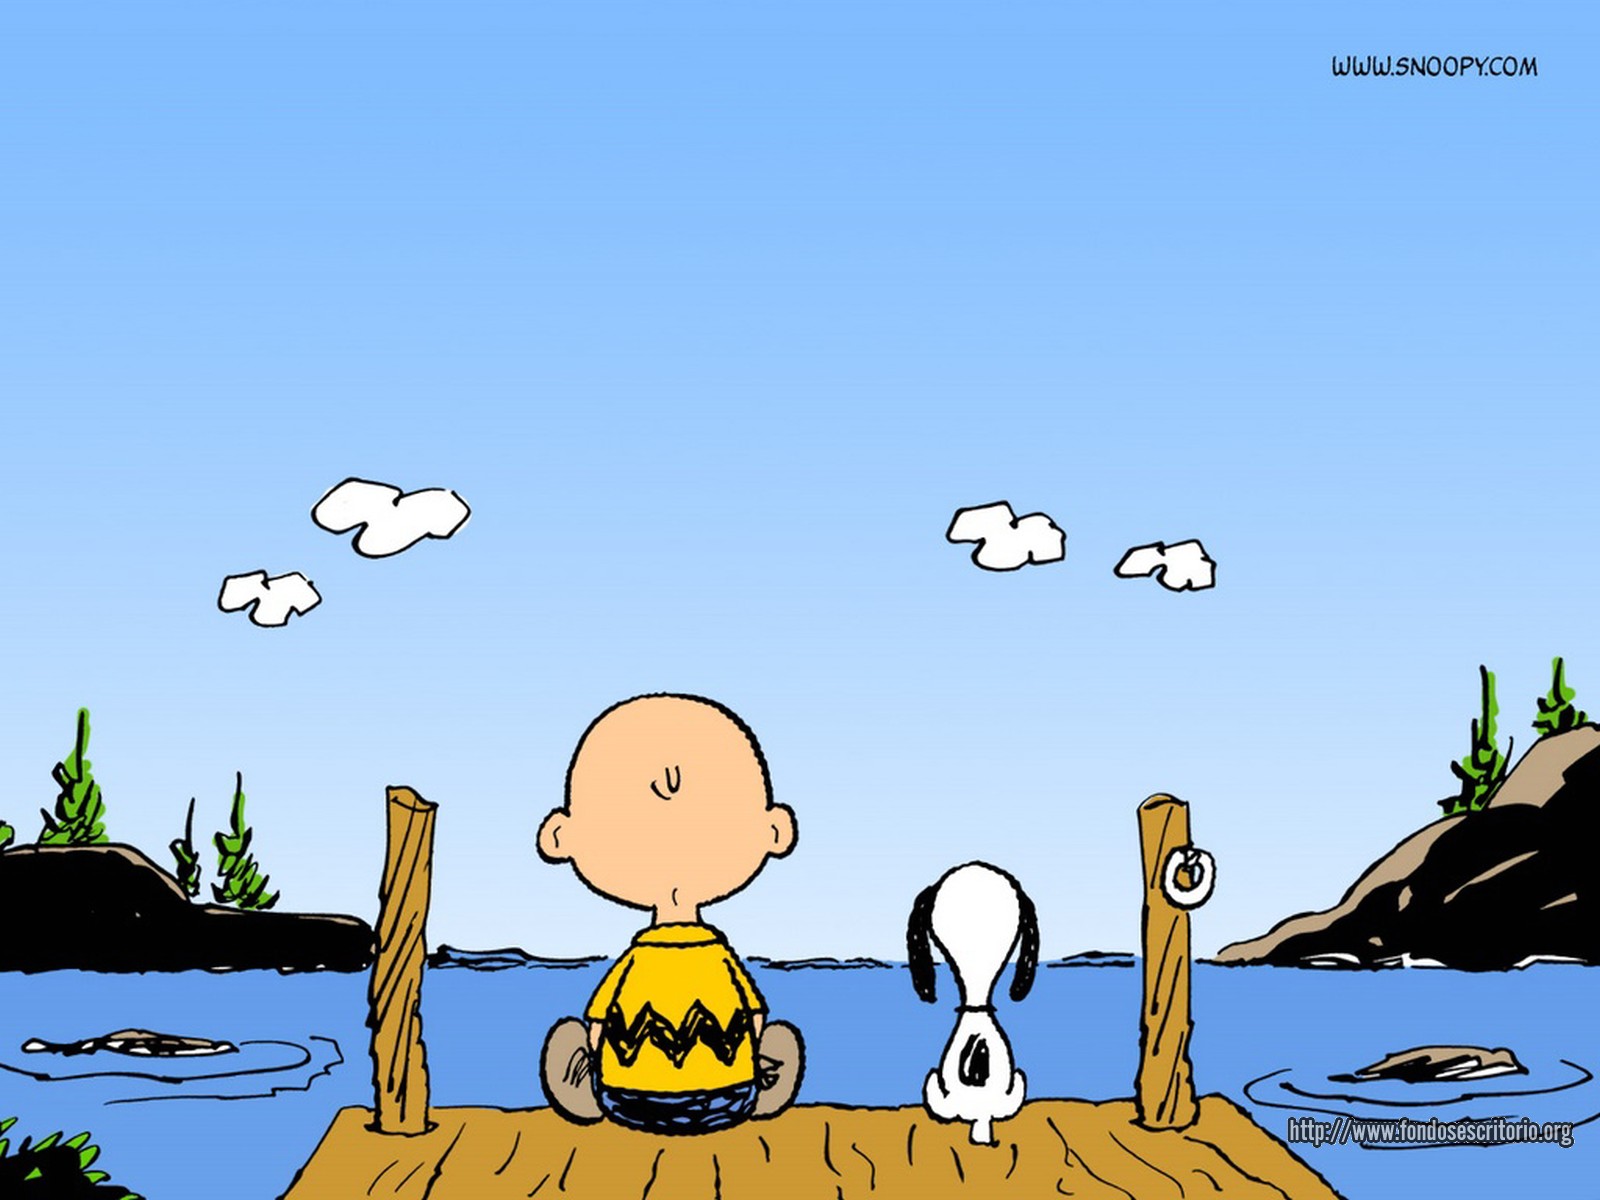 Snoopy Peanuts Desktop Wallpaper   Picture   Wallpaper Collections